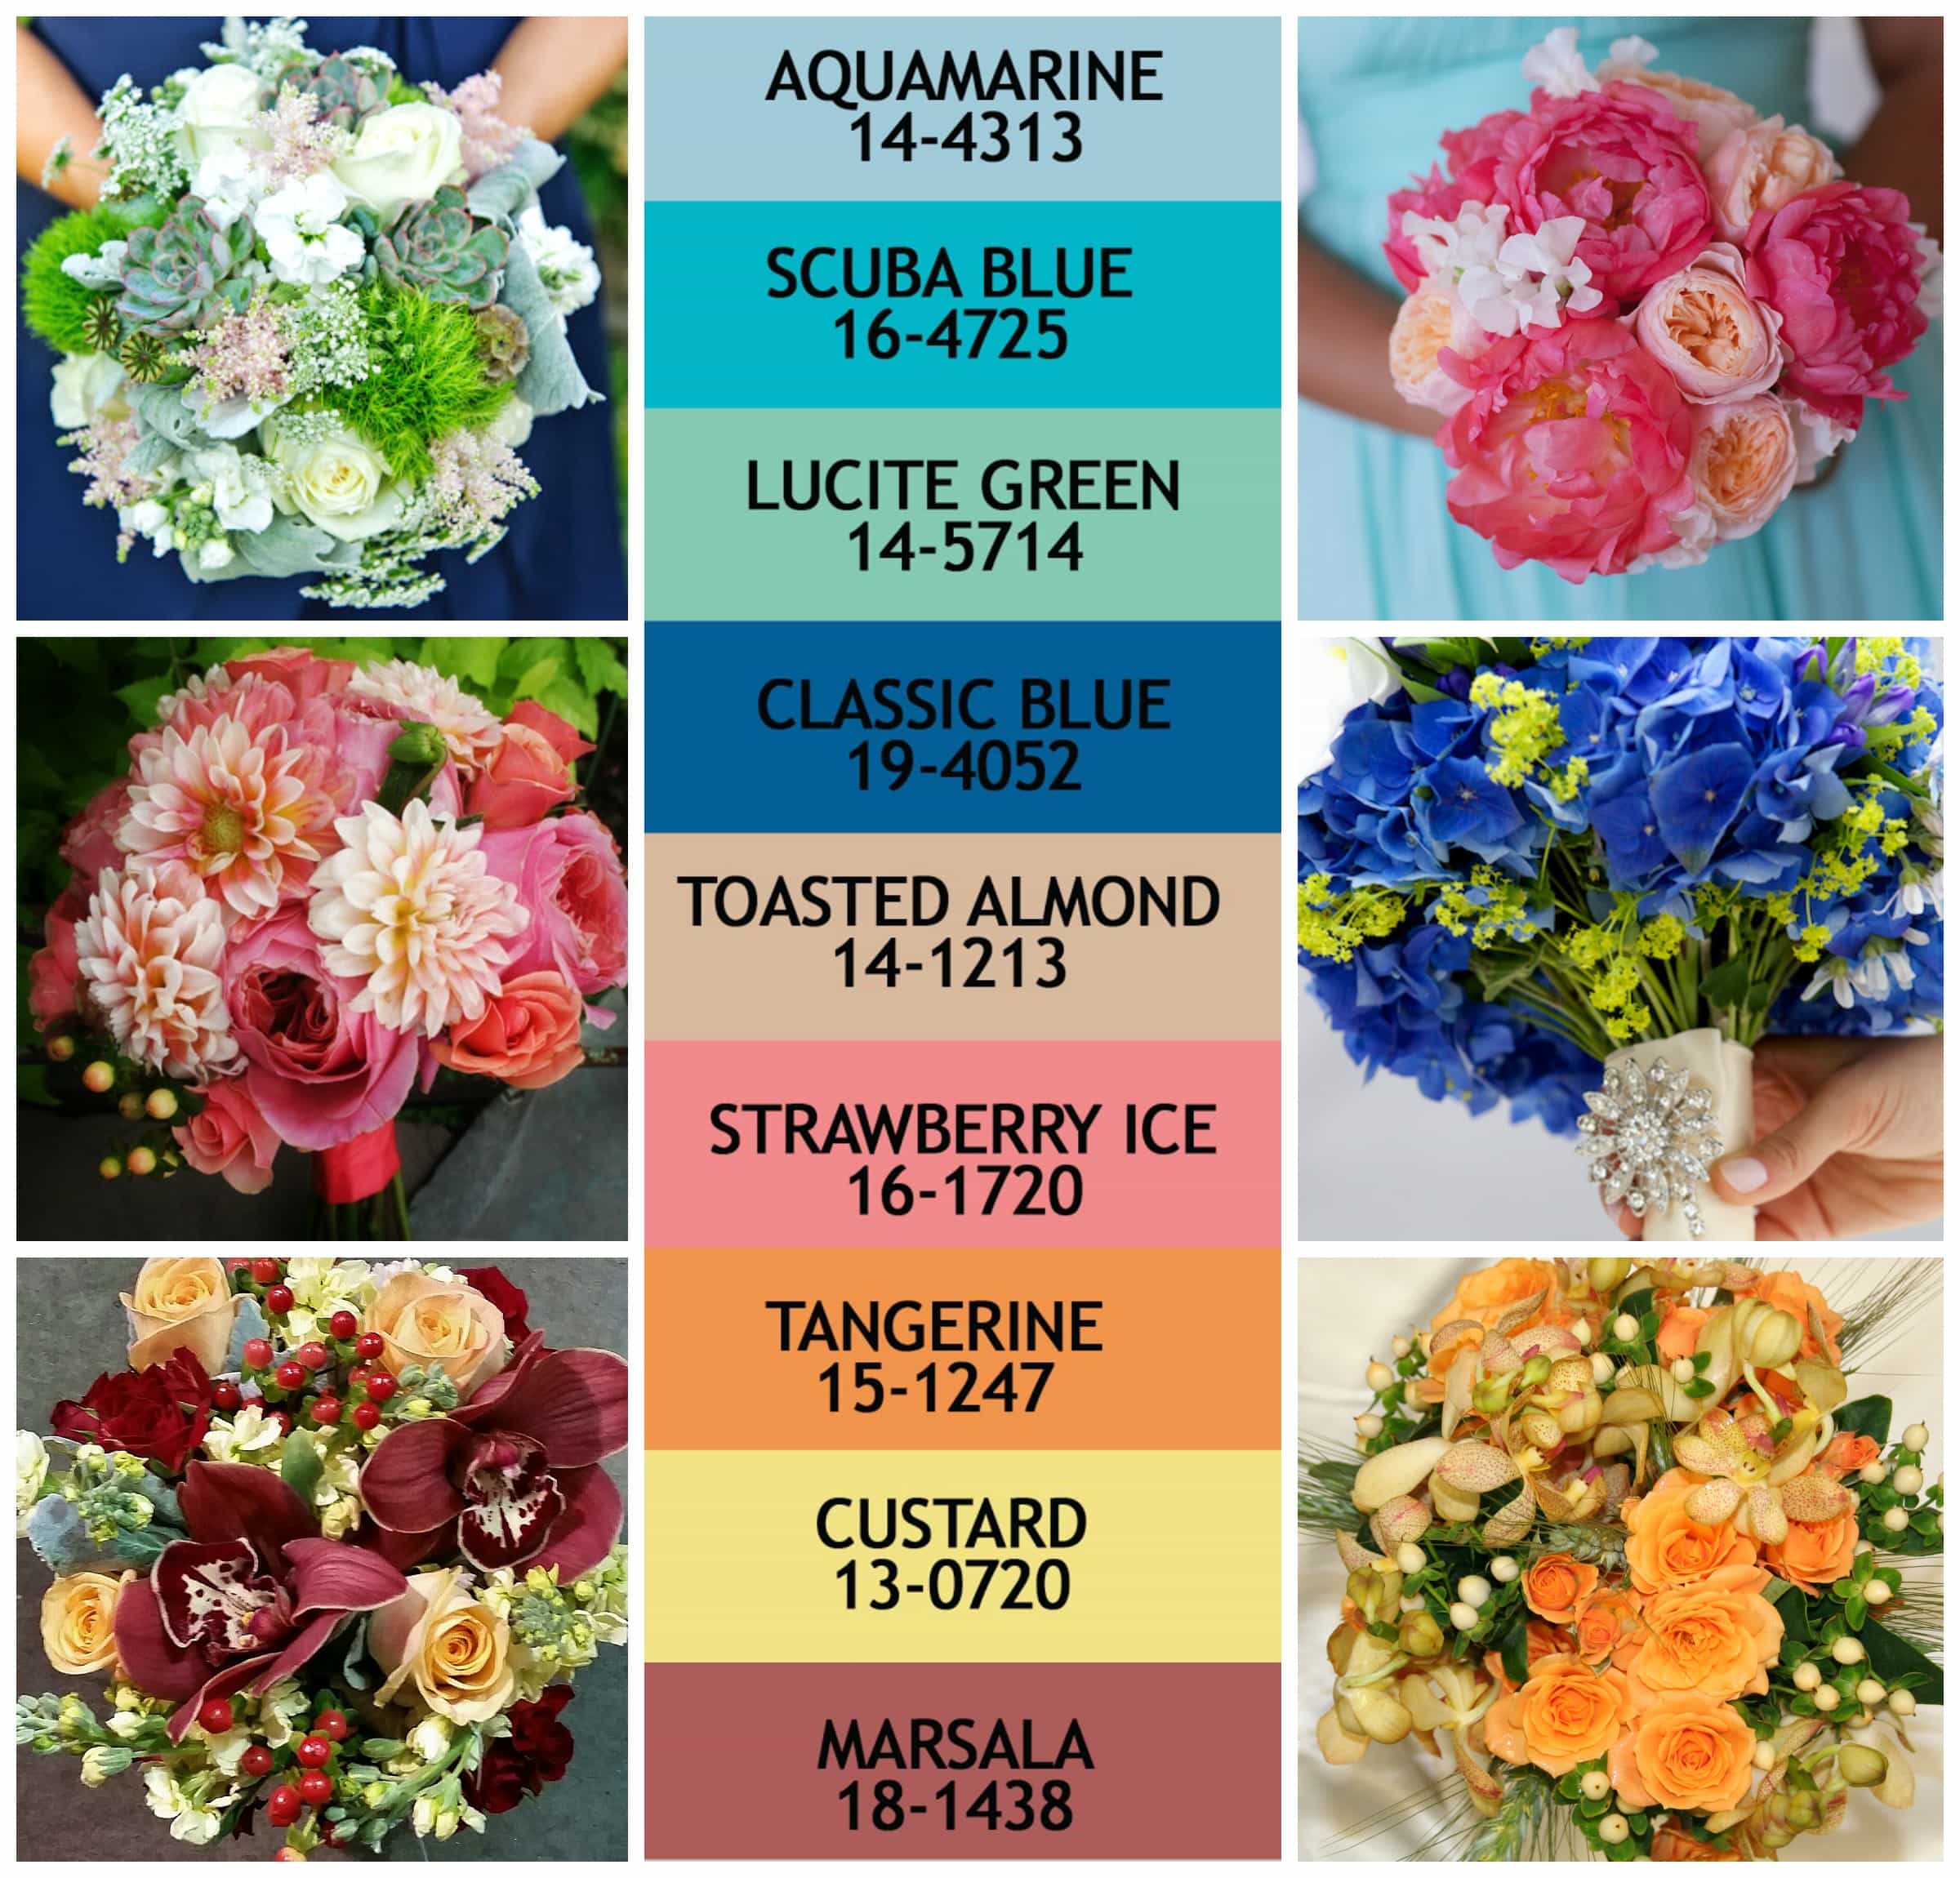 Pantone Summer 2015 Color Inspiration for Your Wedding or Special Event